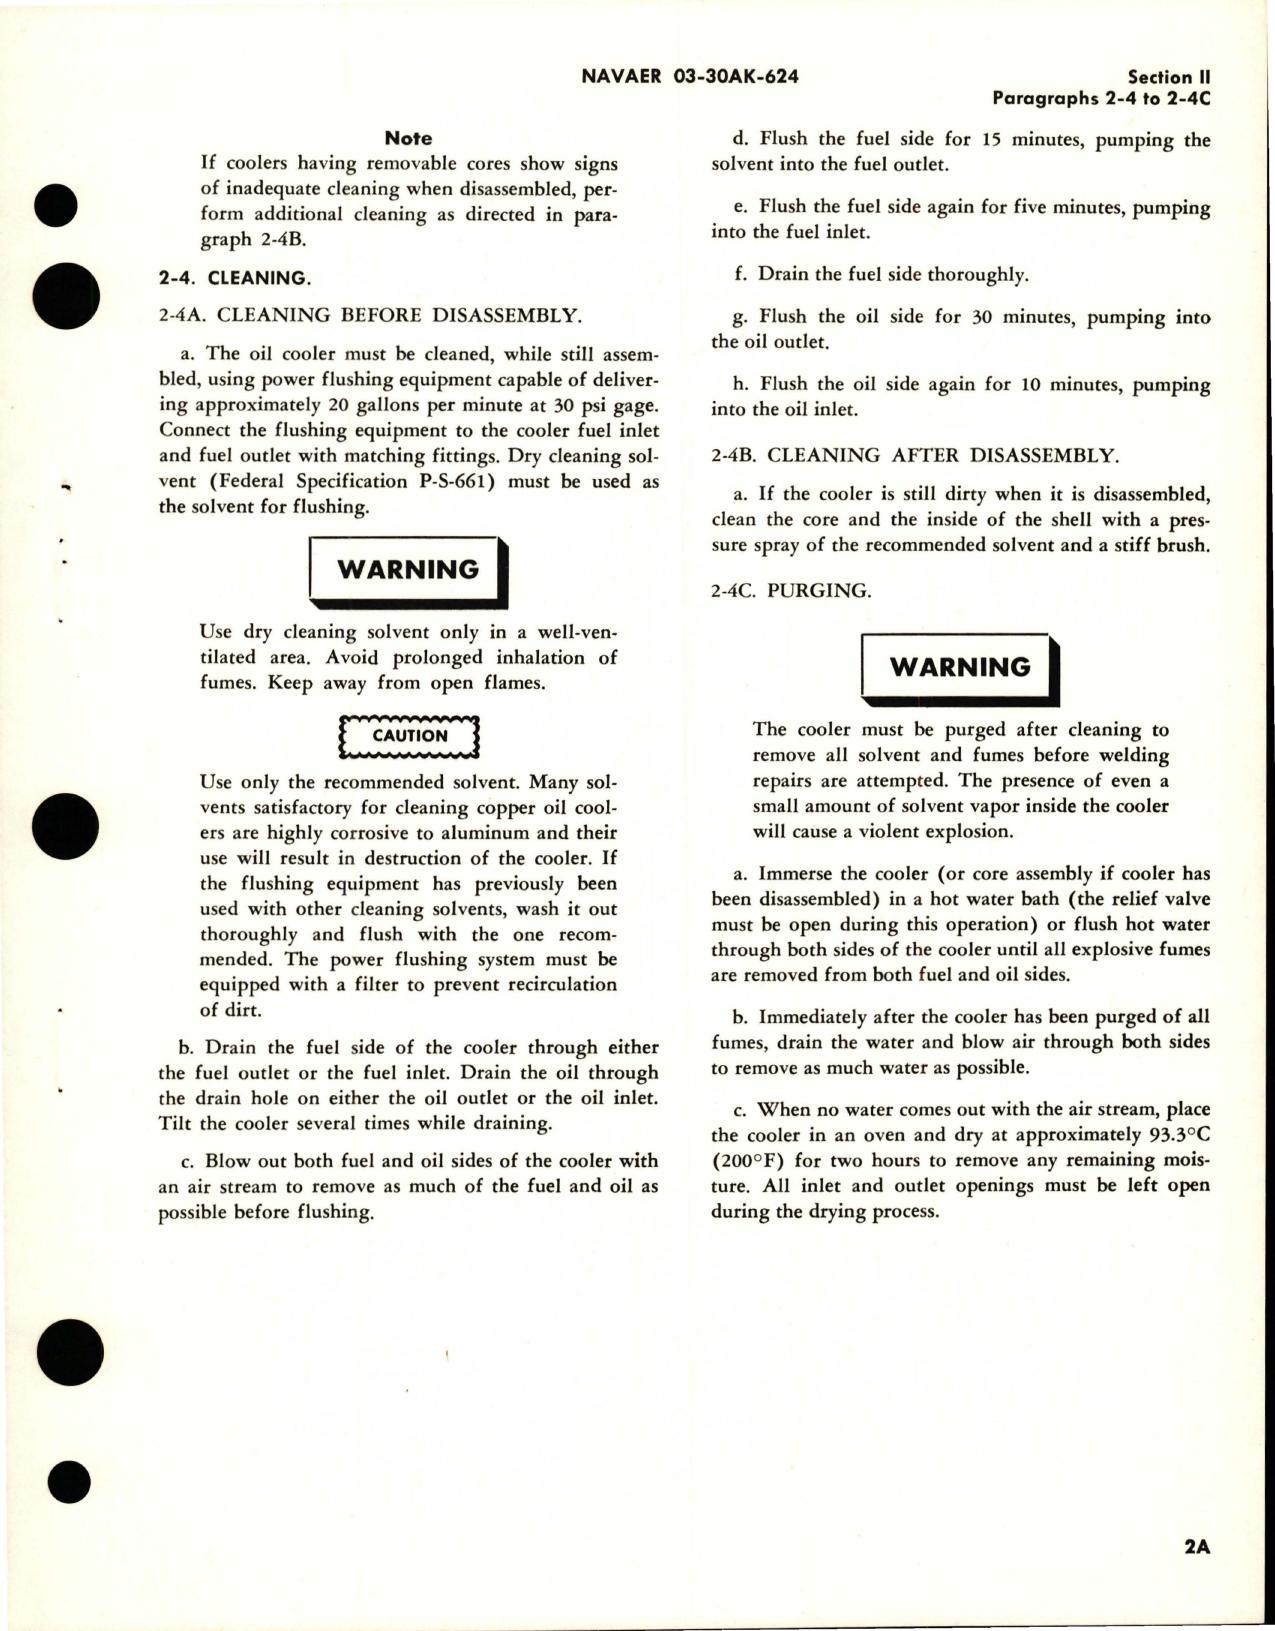 Sample page 7 from AirCorps Library document: Overhaul Instructions for Oil Coolers, Heat Exchanger, and Fuel Heater - Parts 86787 and 87889